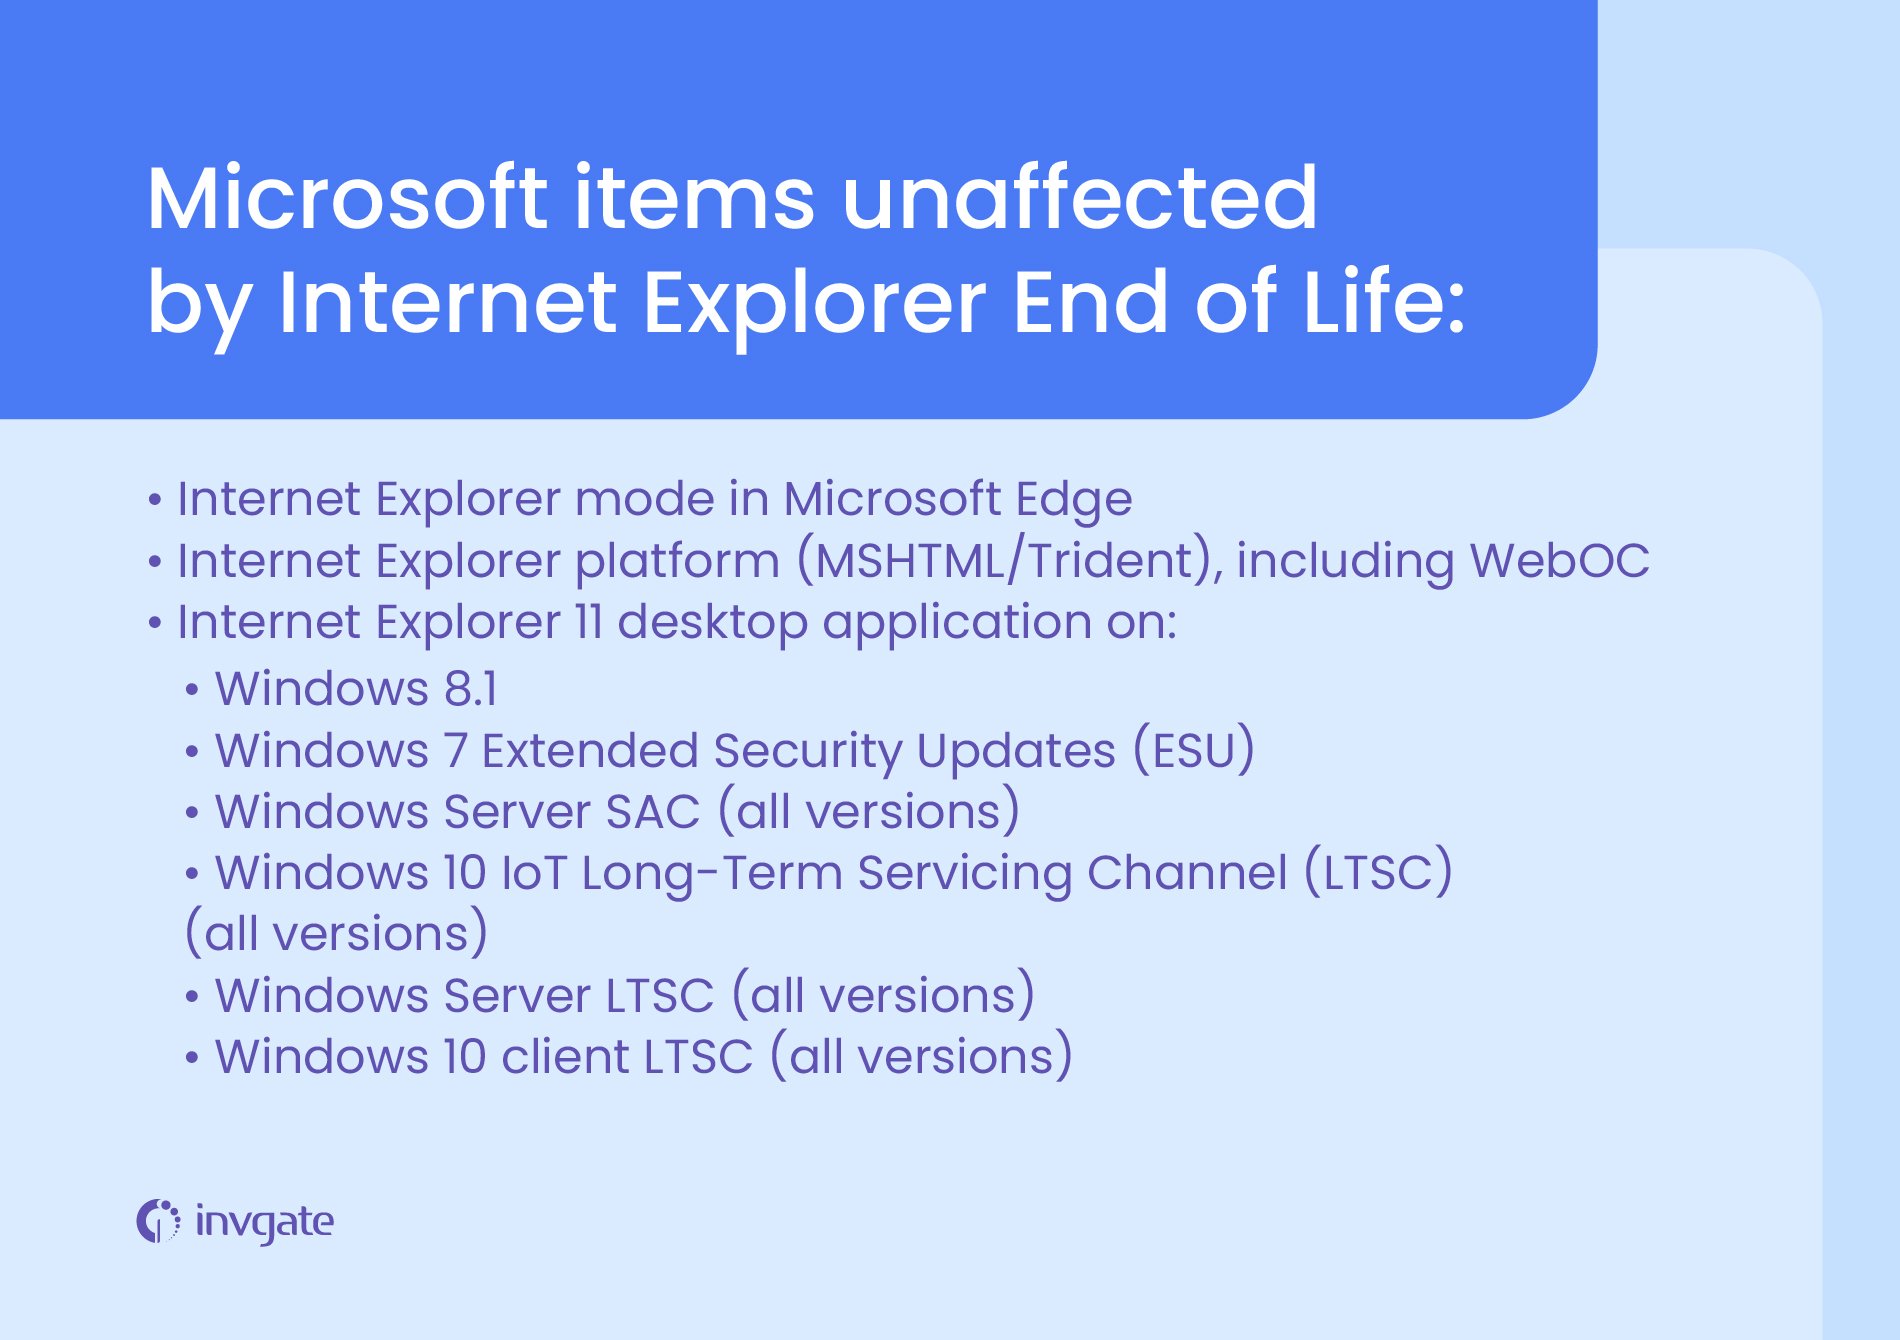 Microsoft products unaffected by IE End of Life